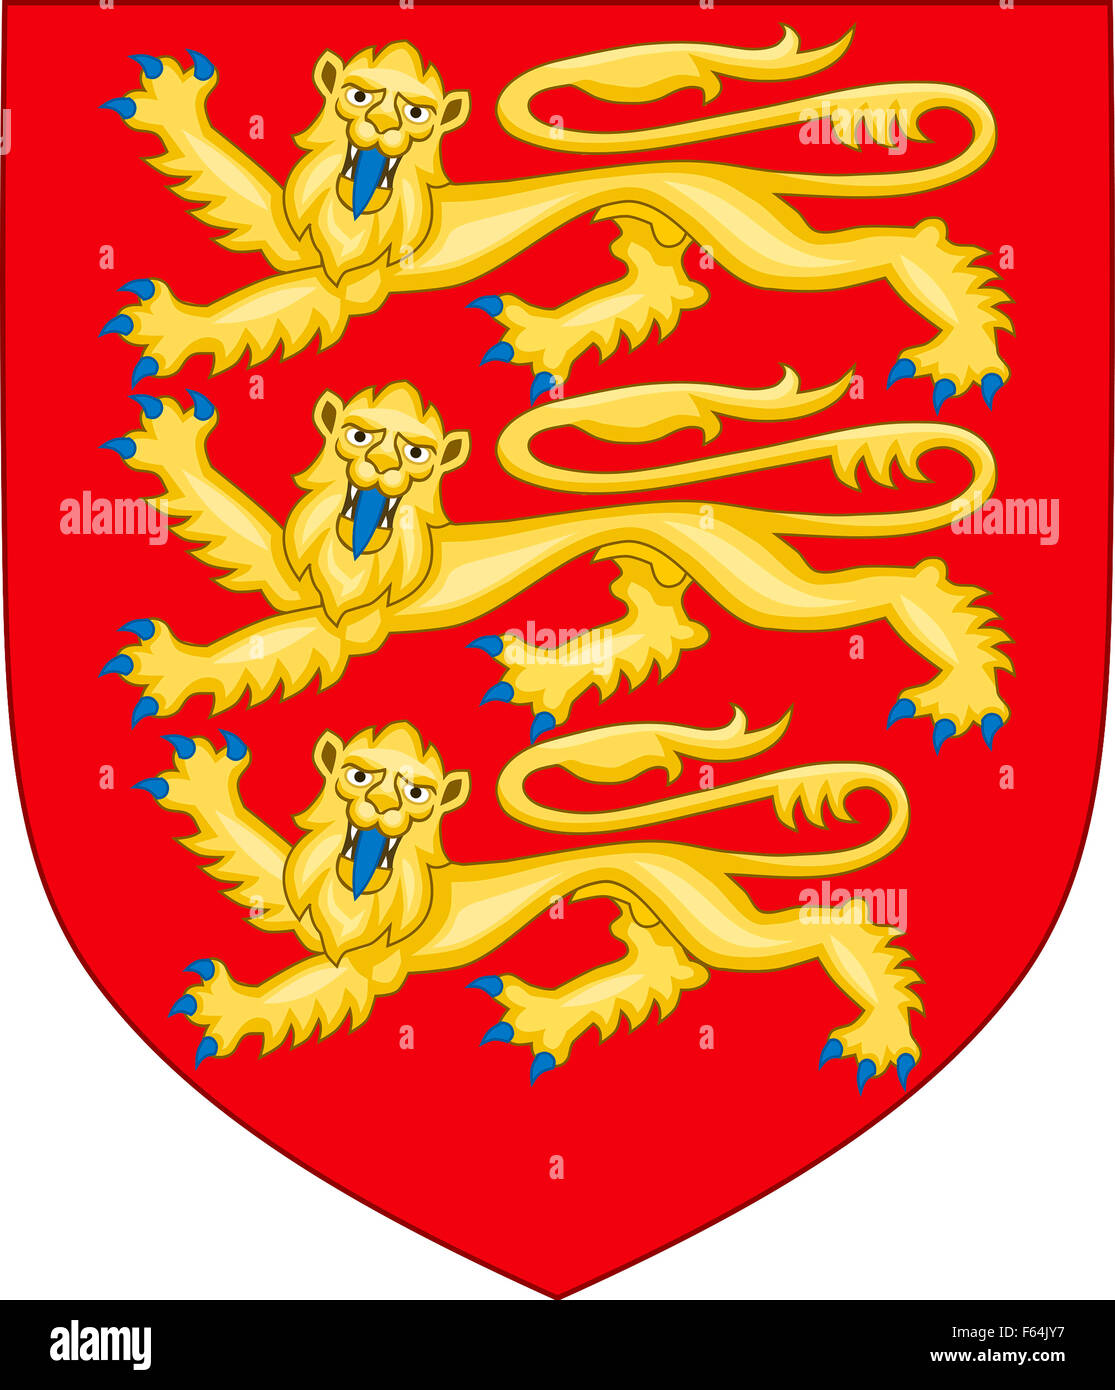 Royal coat of arms of England. Stock Photo